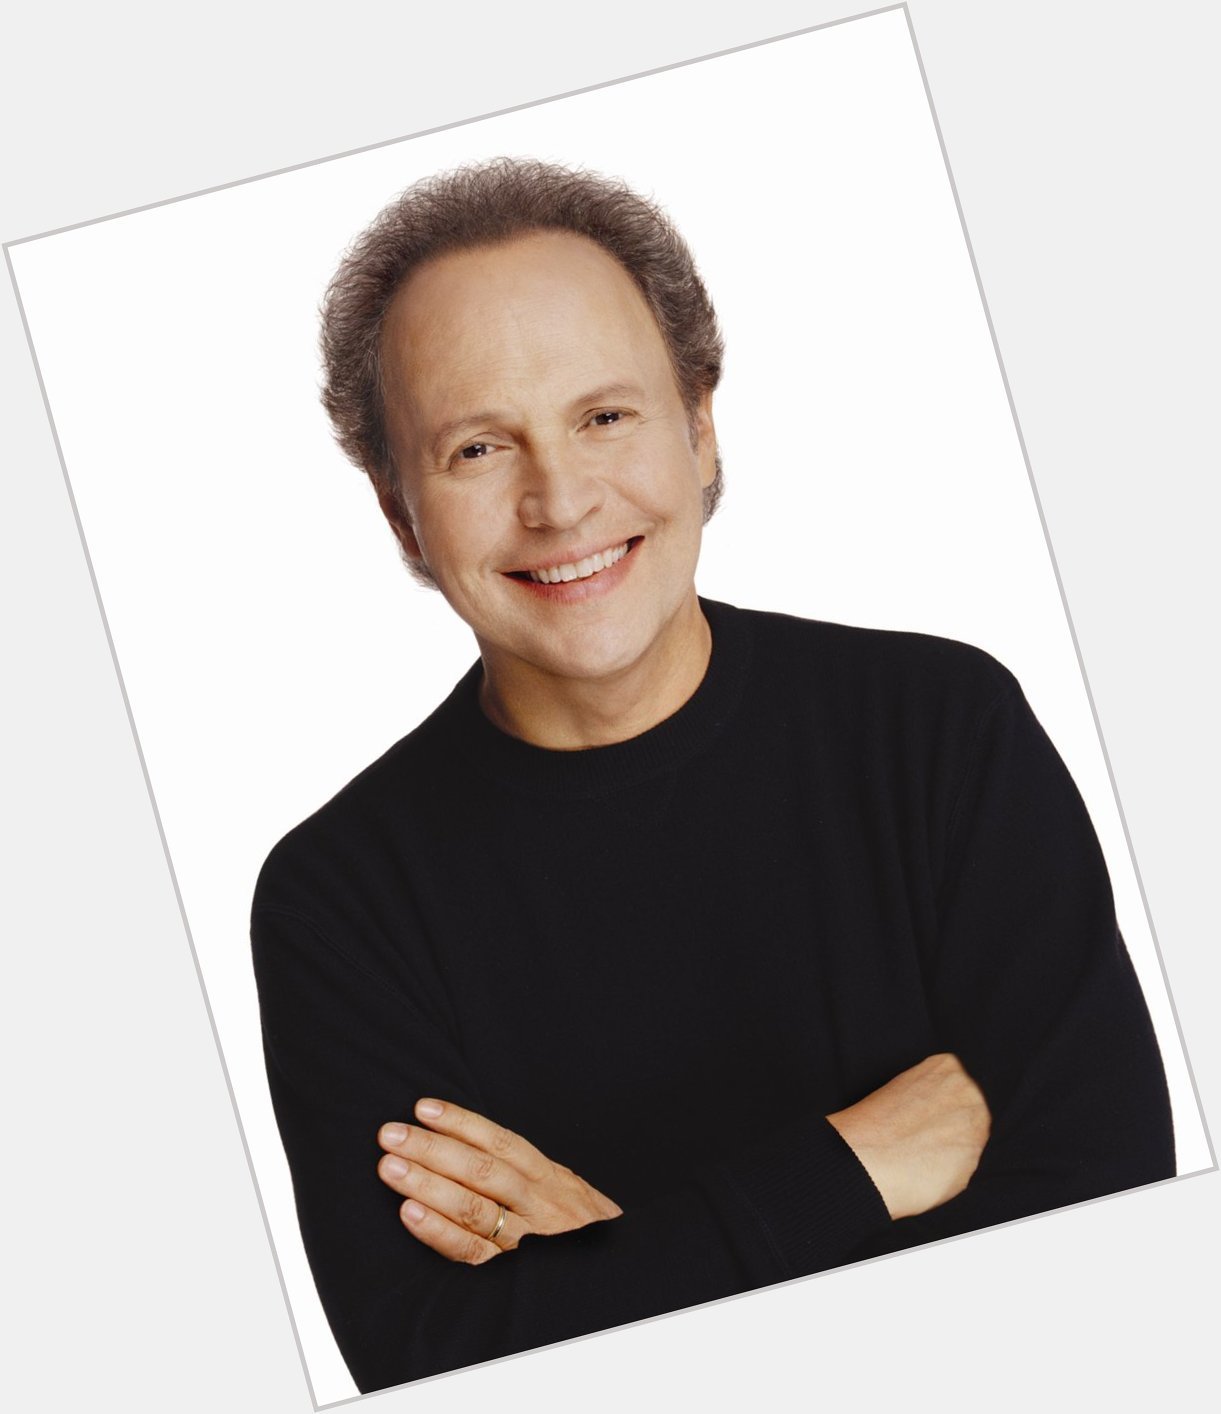 Happy Birthday to the man who gave us our favorite green guy with one eye - Disney Legend Billy Crystal! 